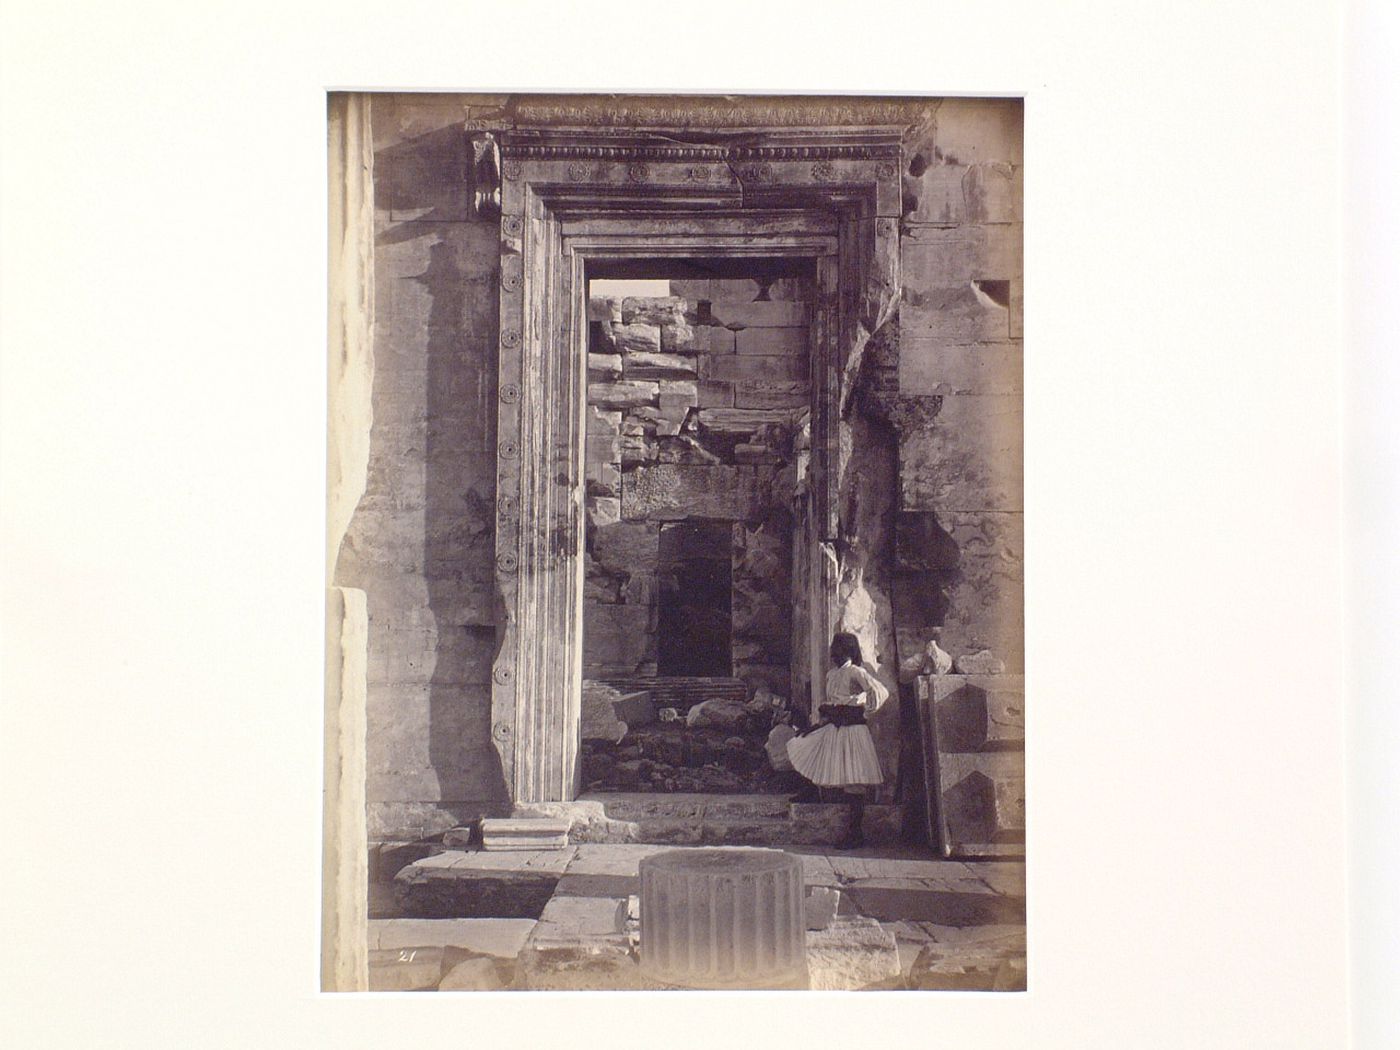 XXI. Gate to the Pandrosium, showing Archectural ornament.